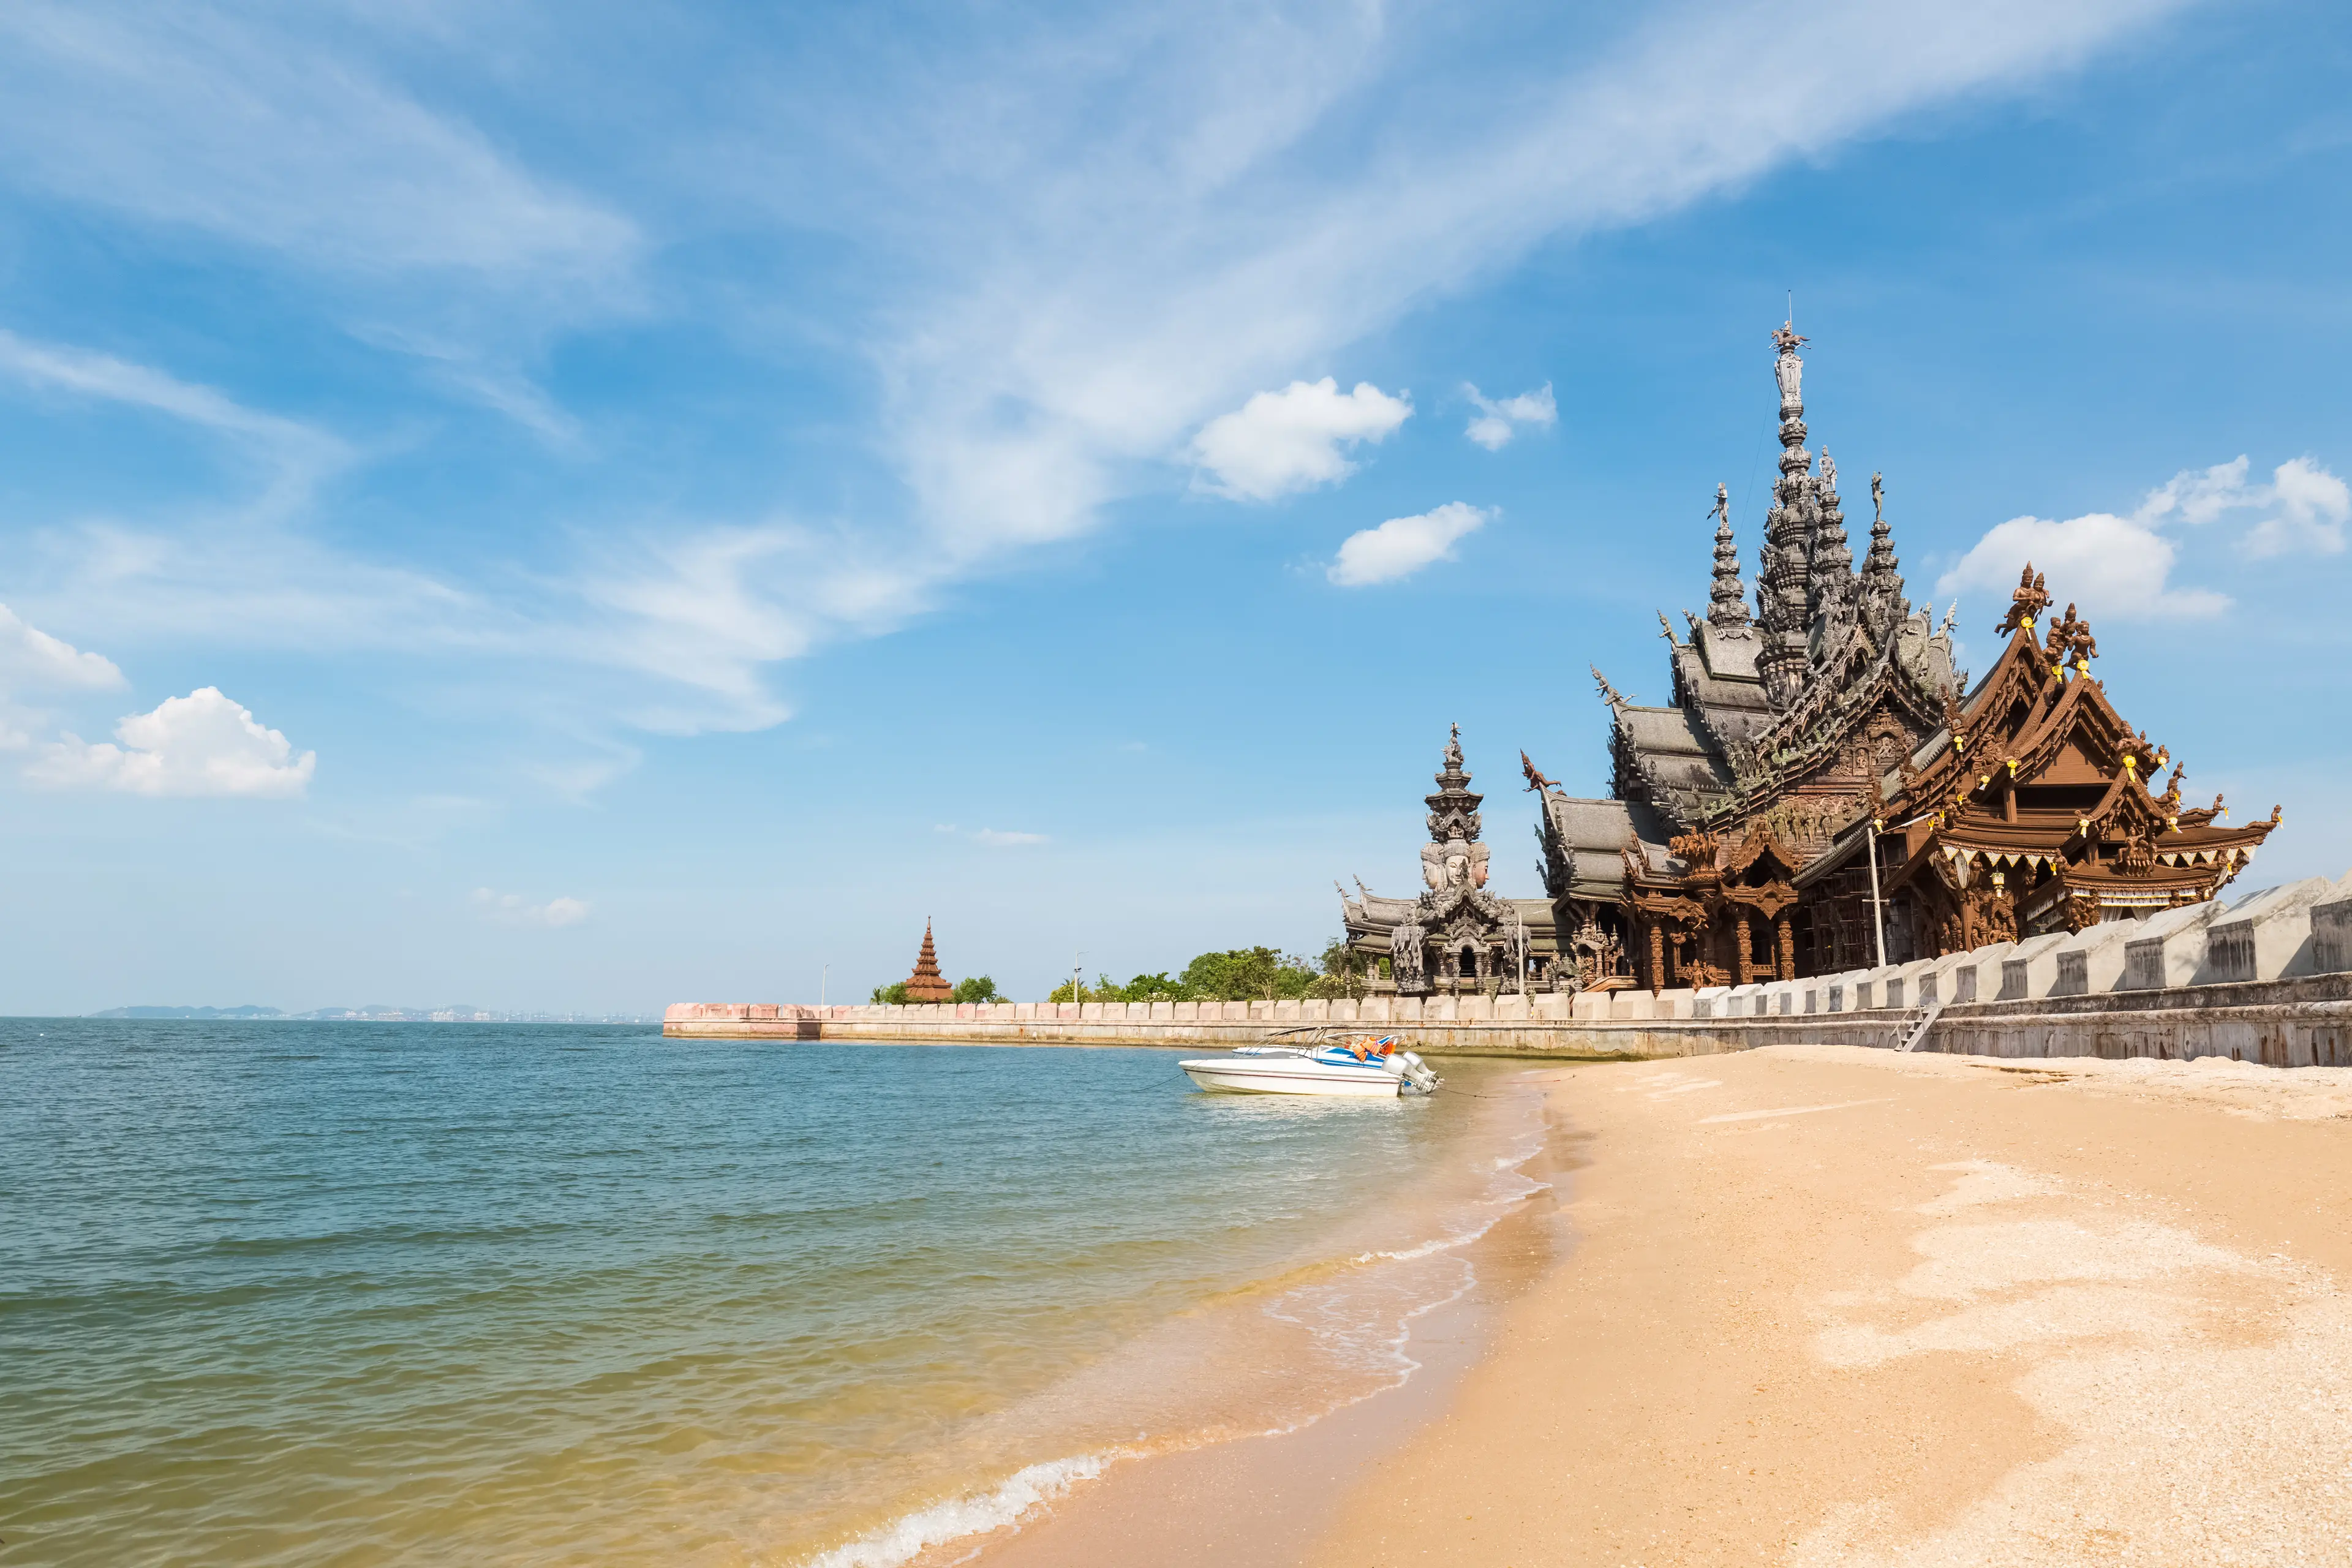 Sanctuary of truth and the adjascent beach